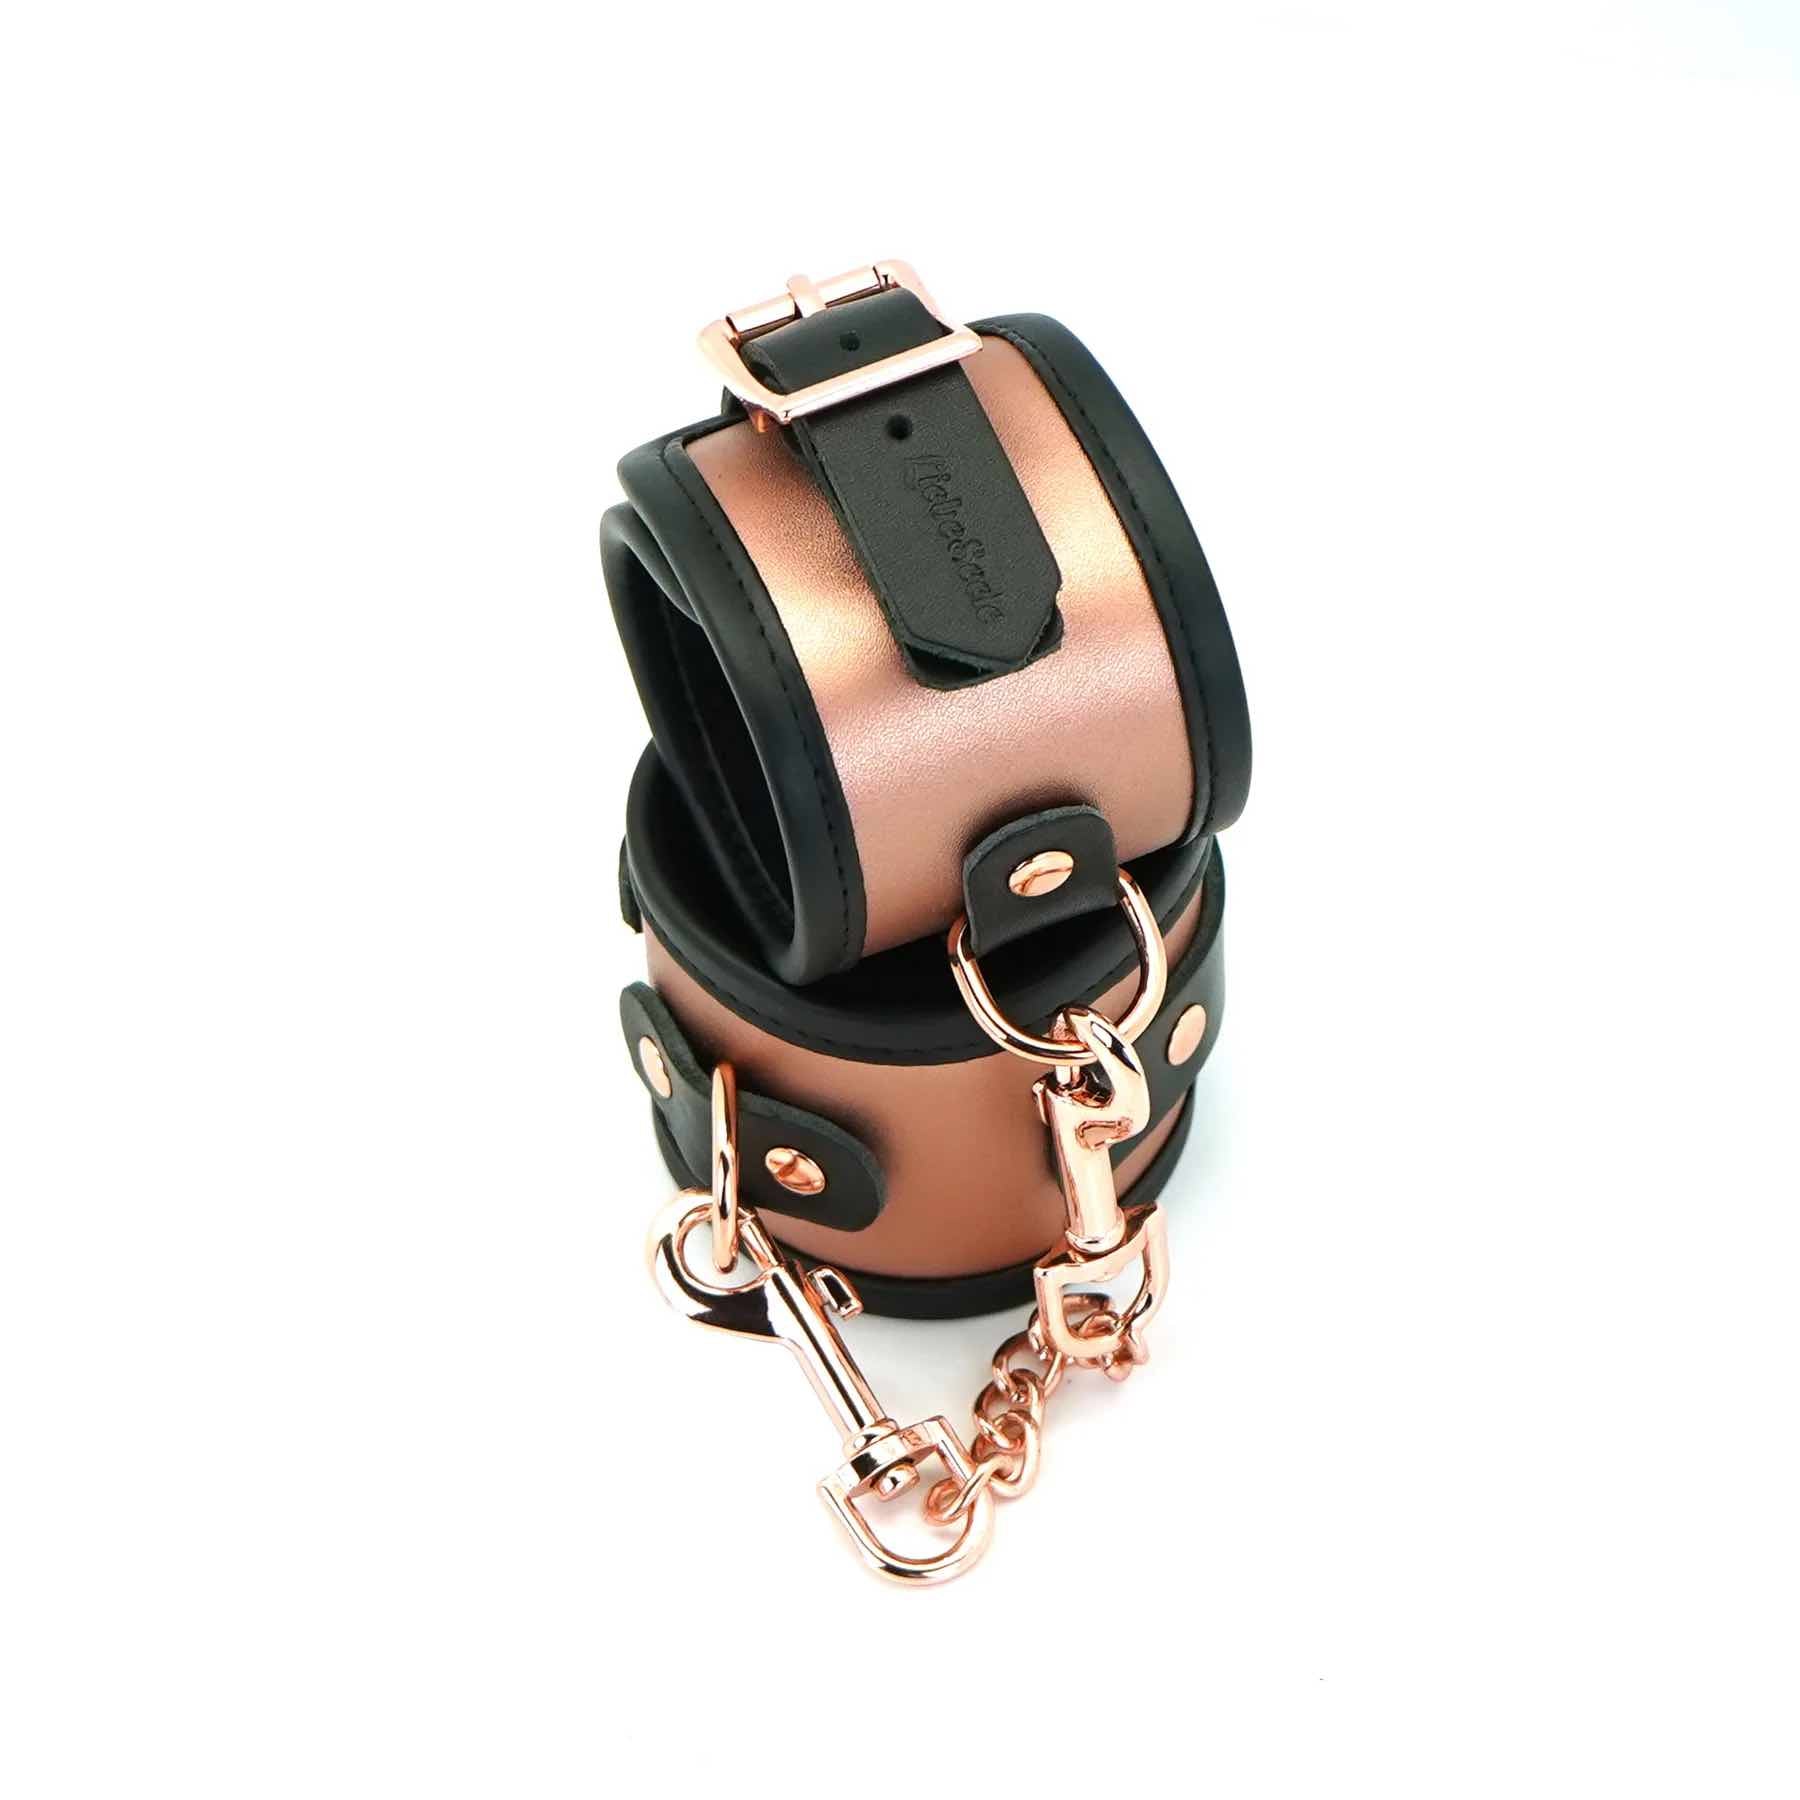 The Rose Gold Memory Leather Cuffs with Faux Fur LIning buckled and closed with one cuff resting on top of the other.